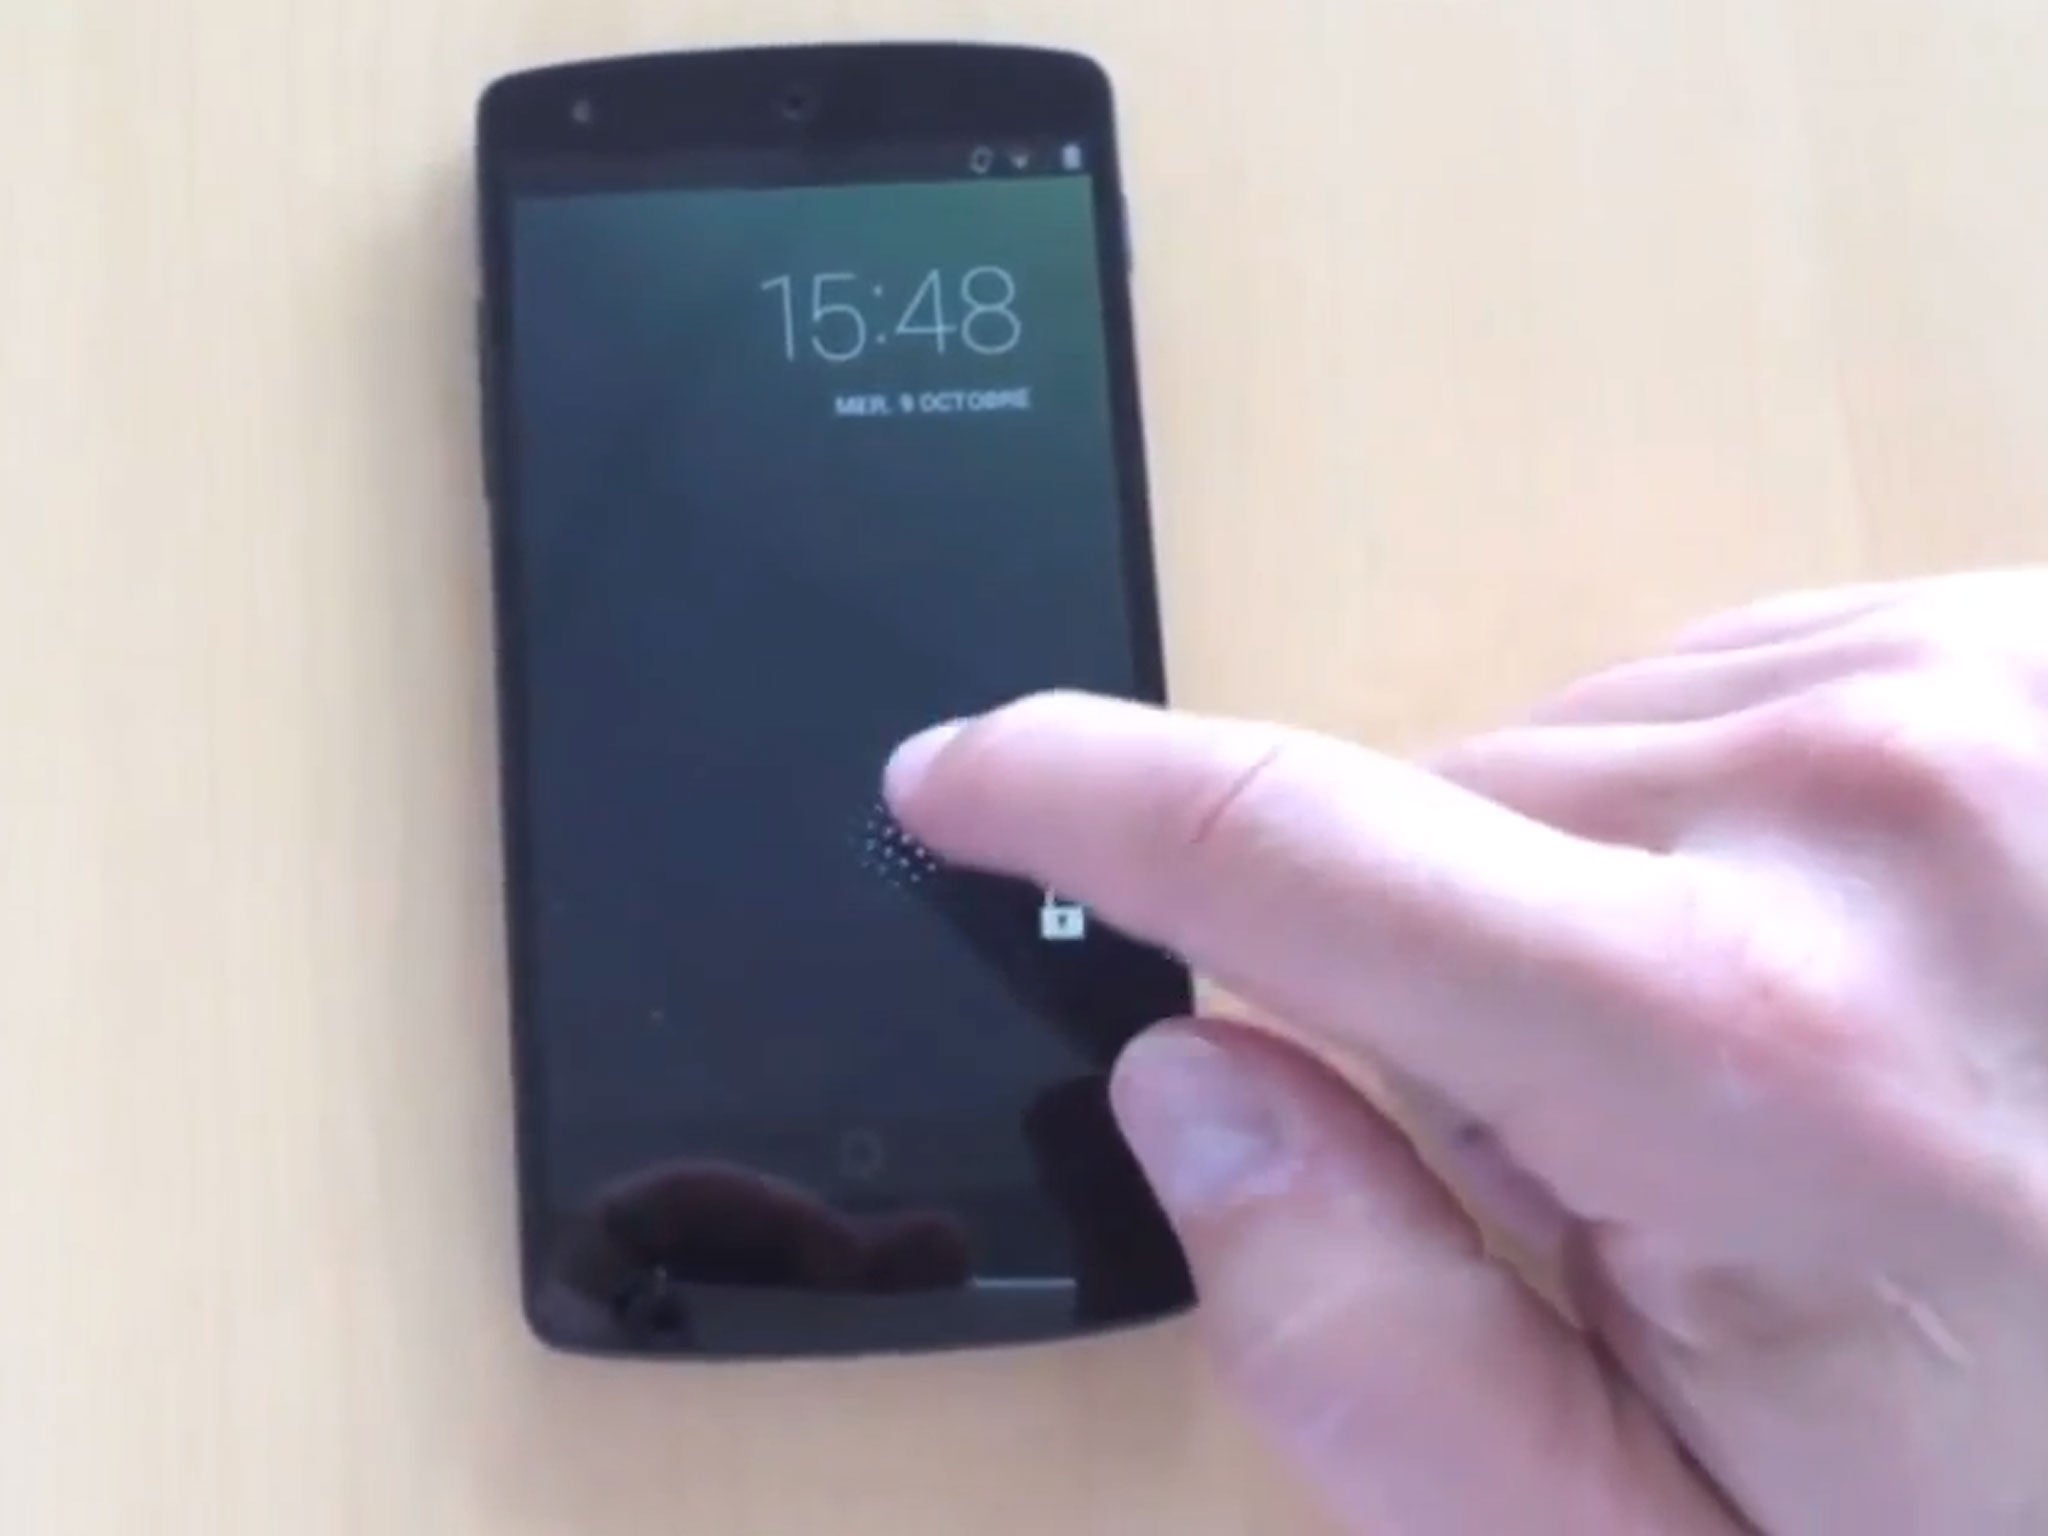 A screenshot from the video showing off the purported Nexus 5.